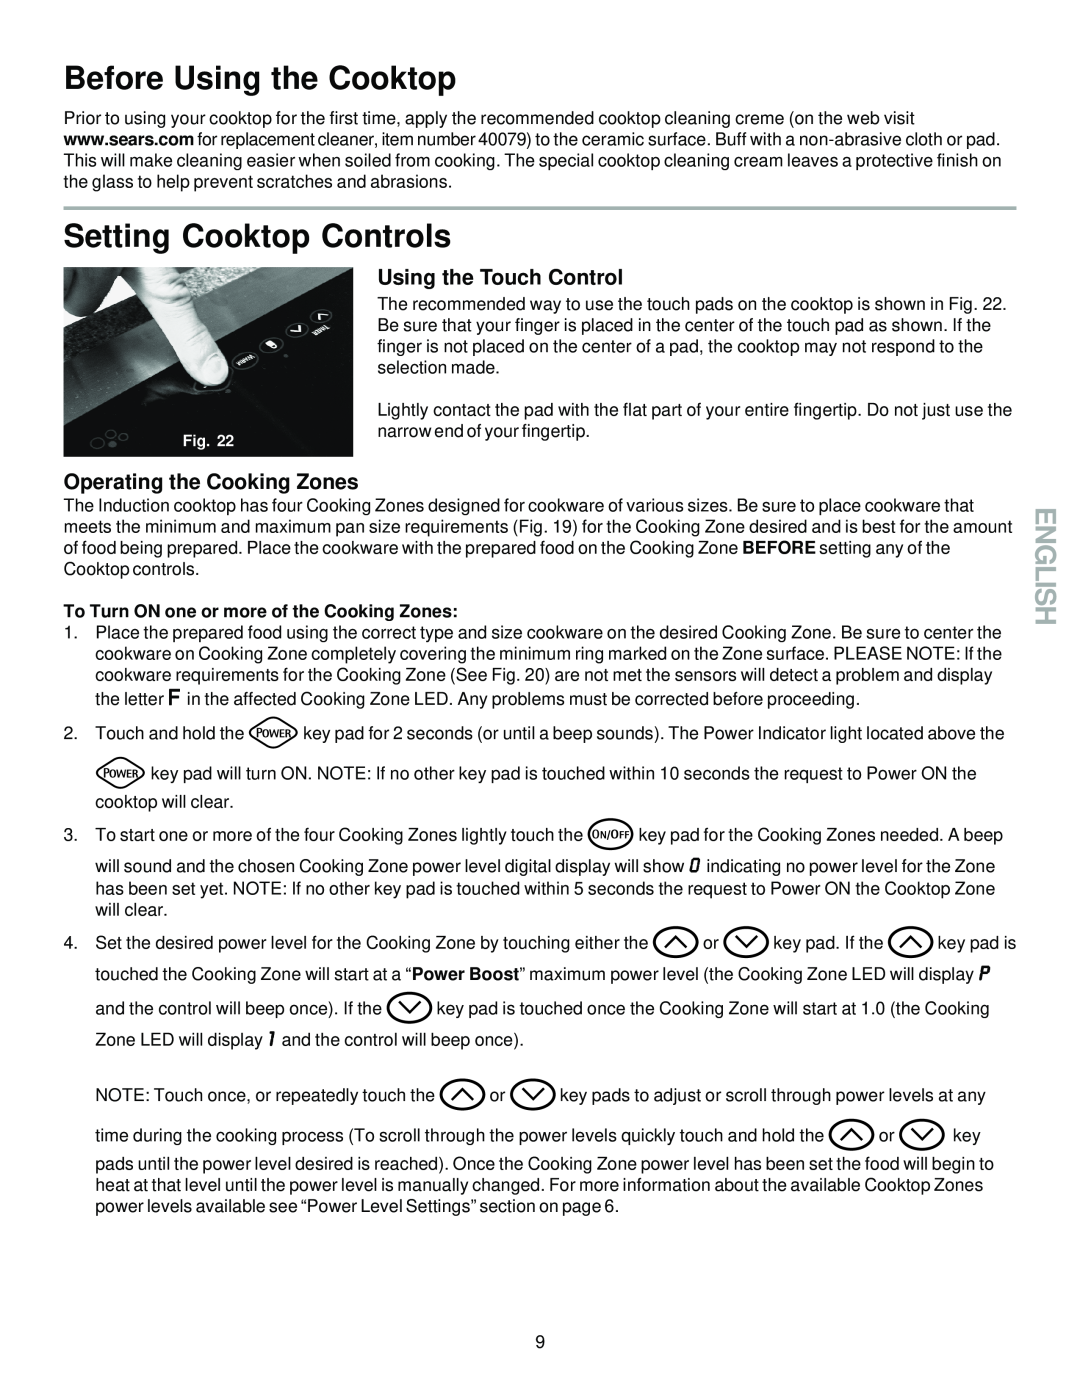 Sears 790.428 manual Setting Cooktop Controls, Before Using the Cooktop, English, Using the Touch Control 